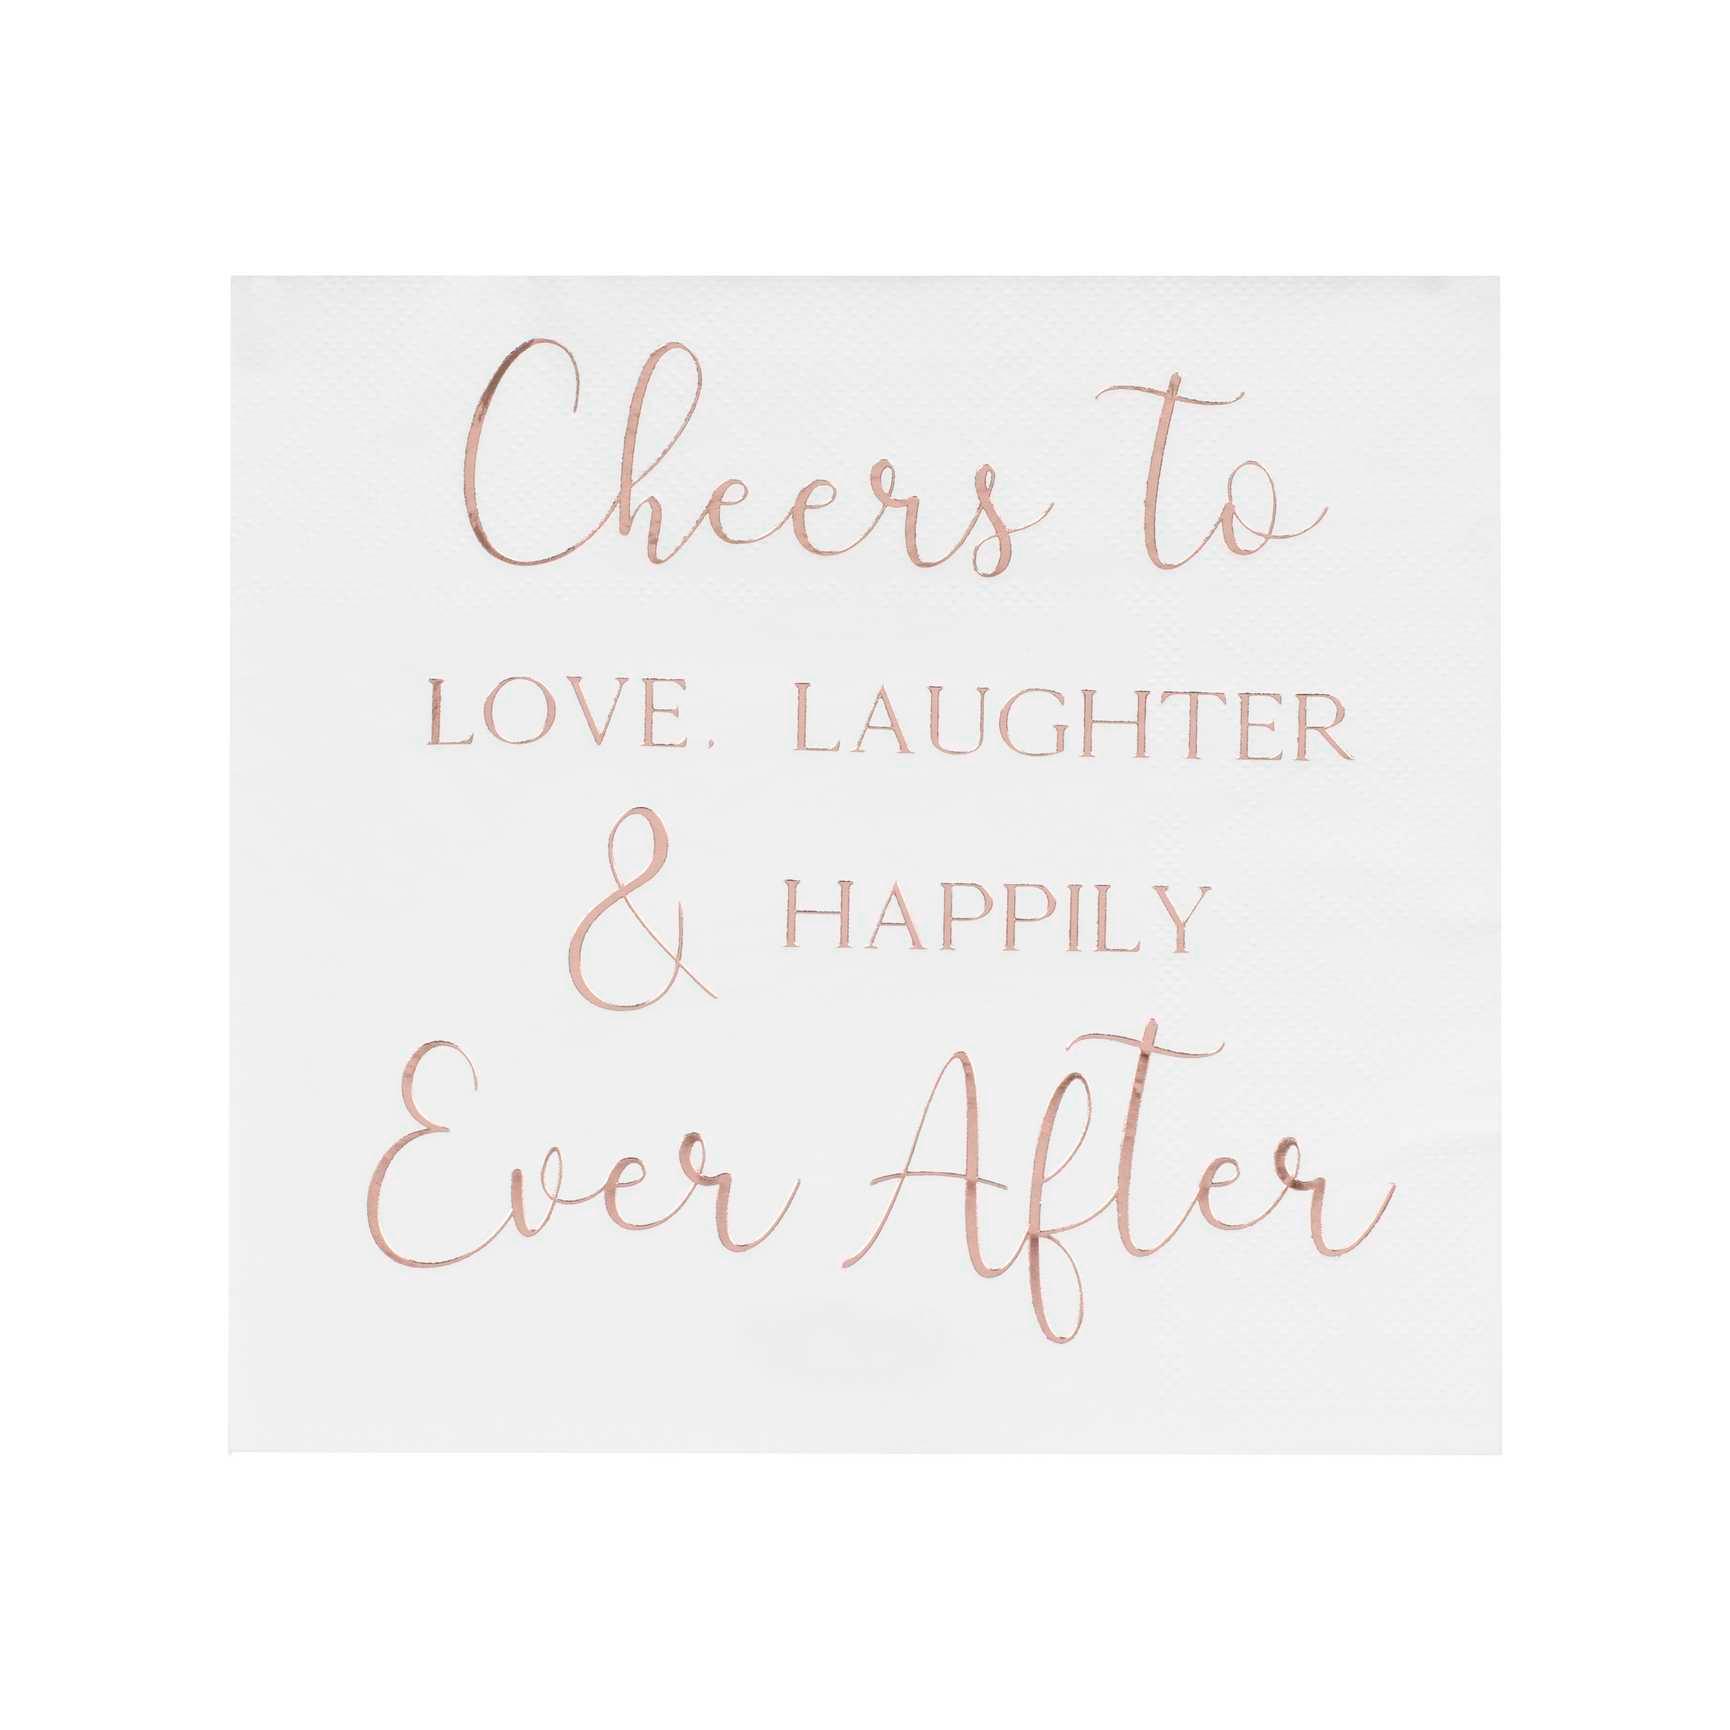 Botanical Happily Ever After Wedding Napkins 16pk - The Party Room